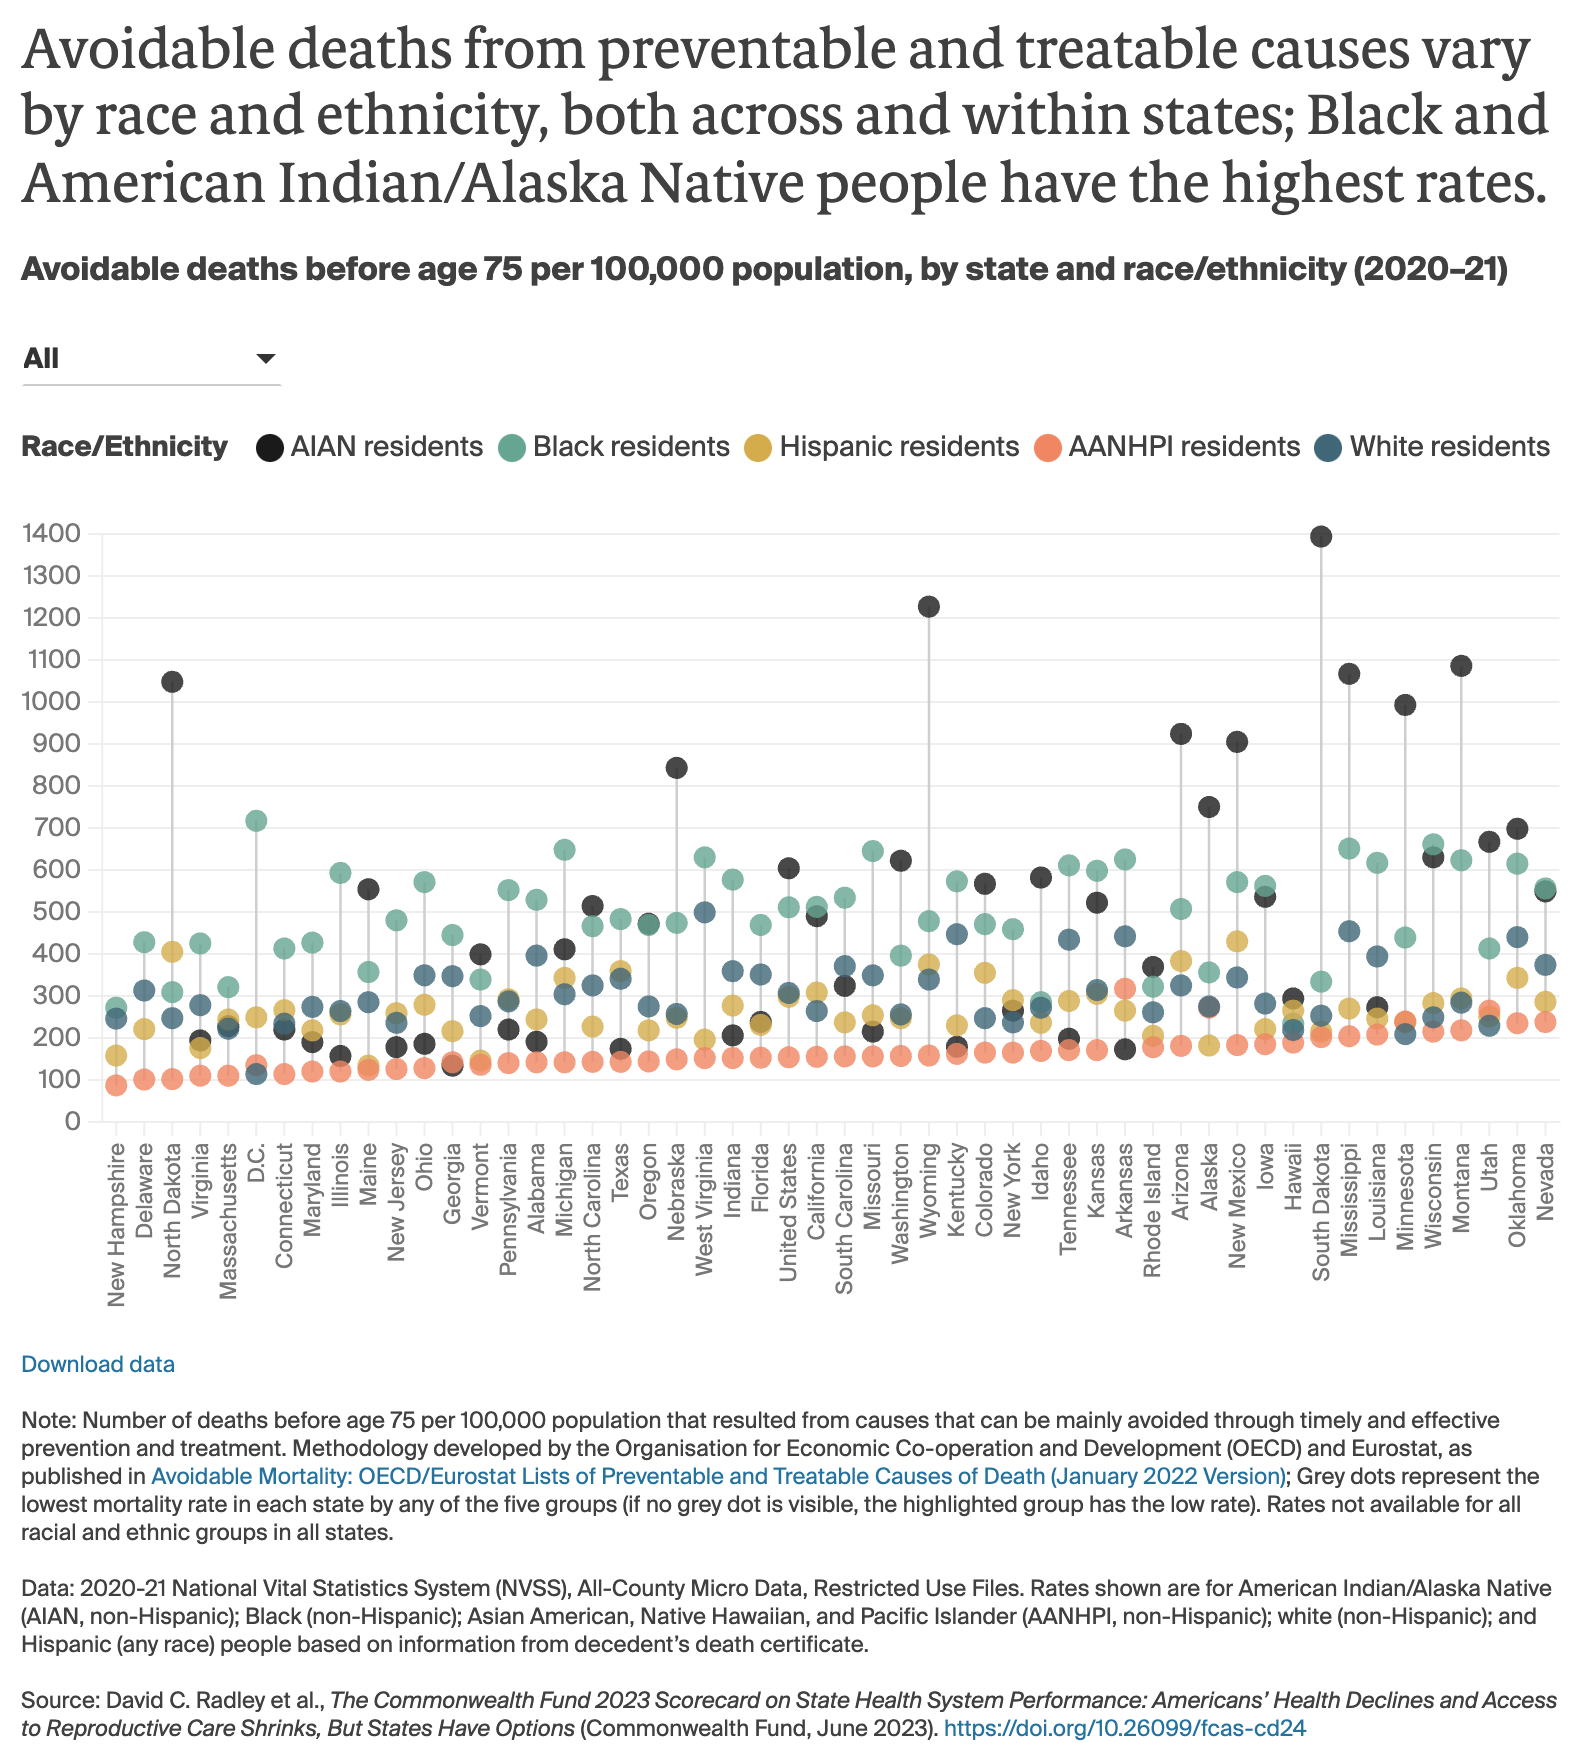 Avoidable deaths from preventable and treatable causes vary by race and ethnicity, both across and within states; Black and American Indian/Alaska Native people have the highest rates.